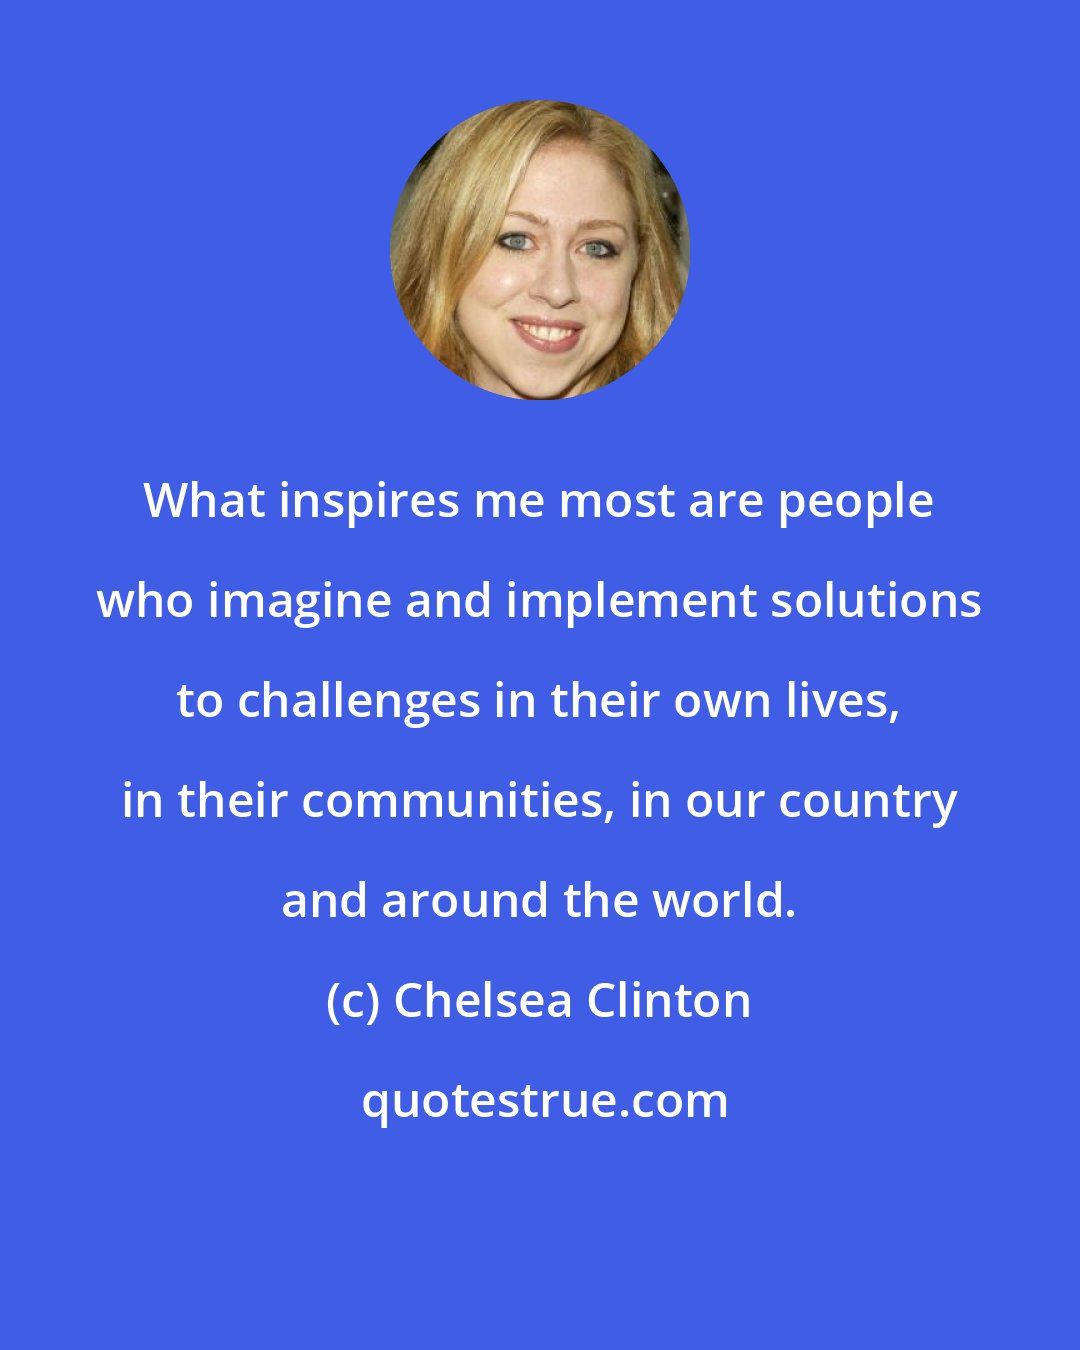 Chelsea Clinton: What inspires me most are people who imagine and implement solutions to challenges in their own lives, in their communities, in our country and around the world.